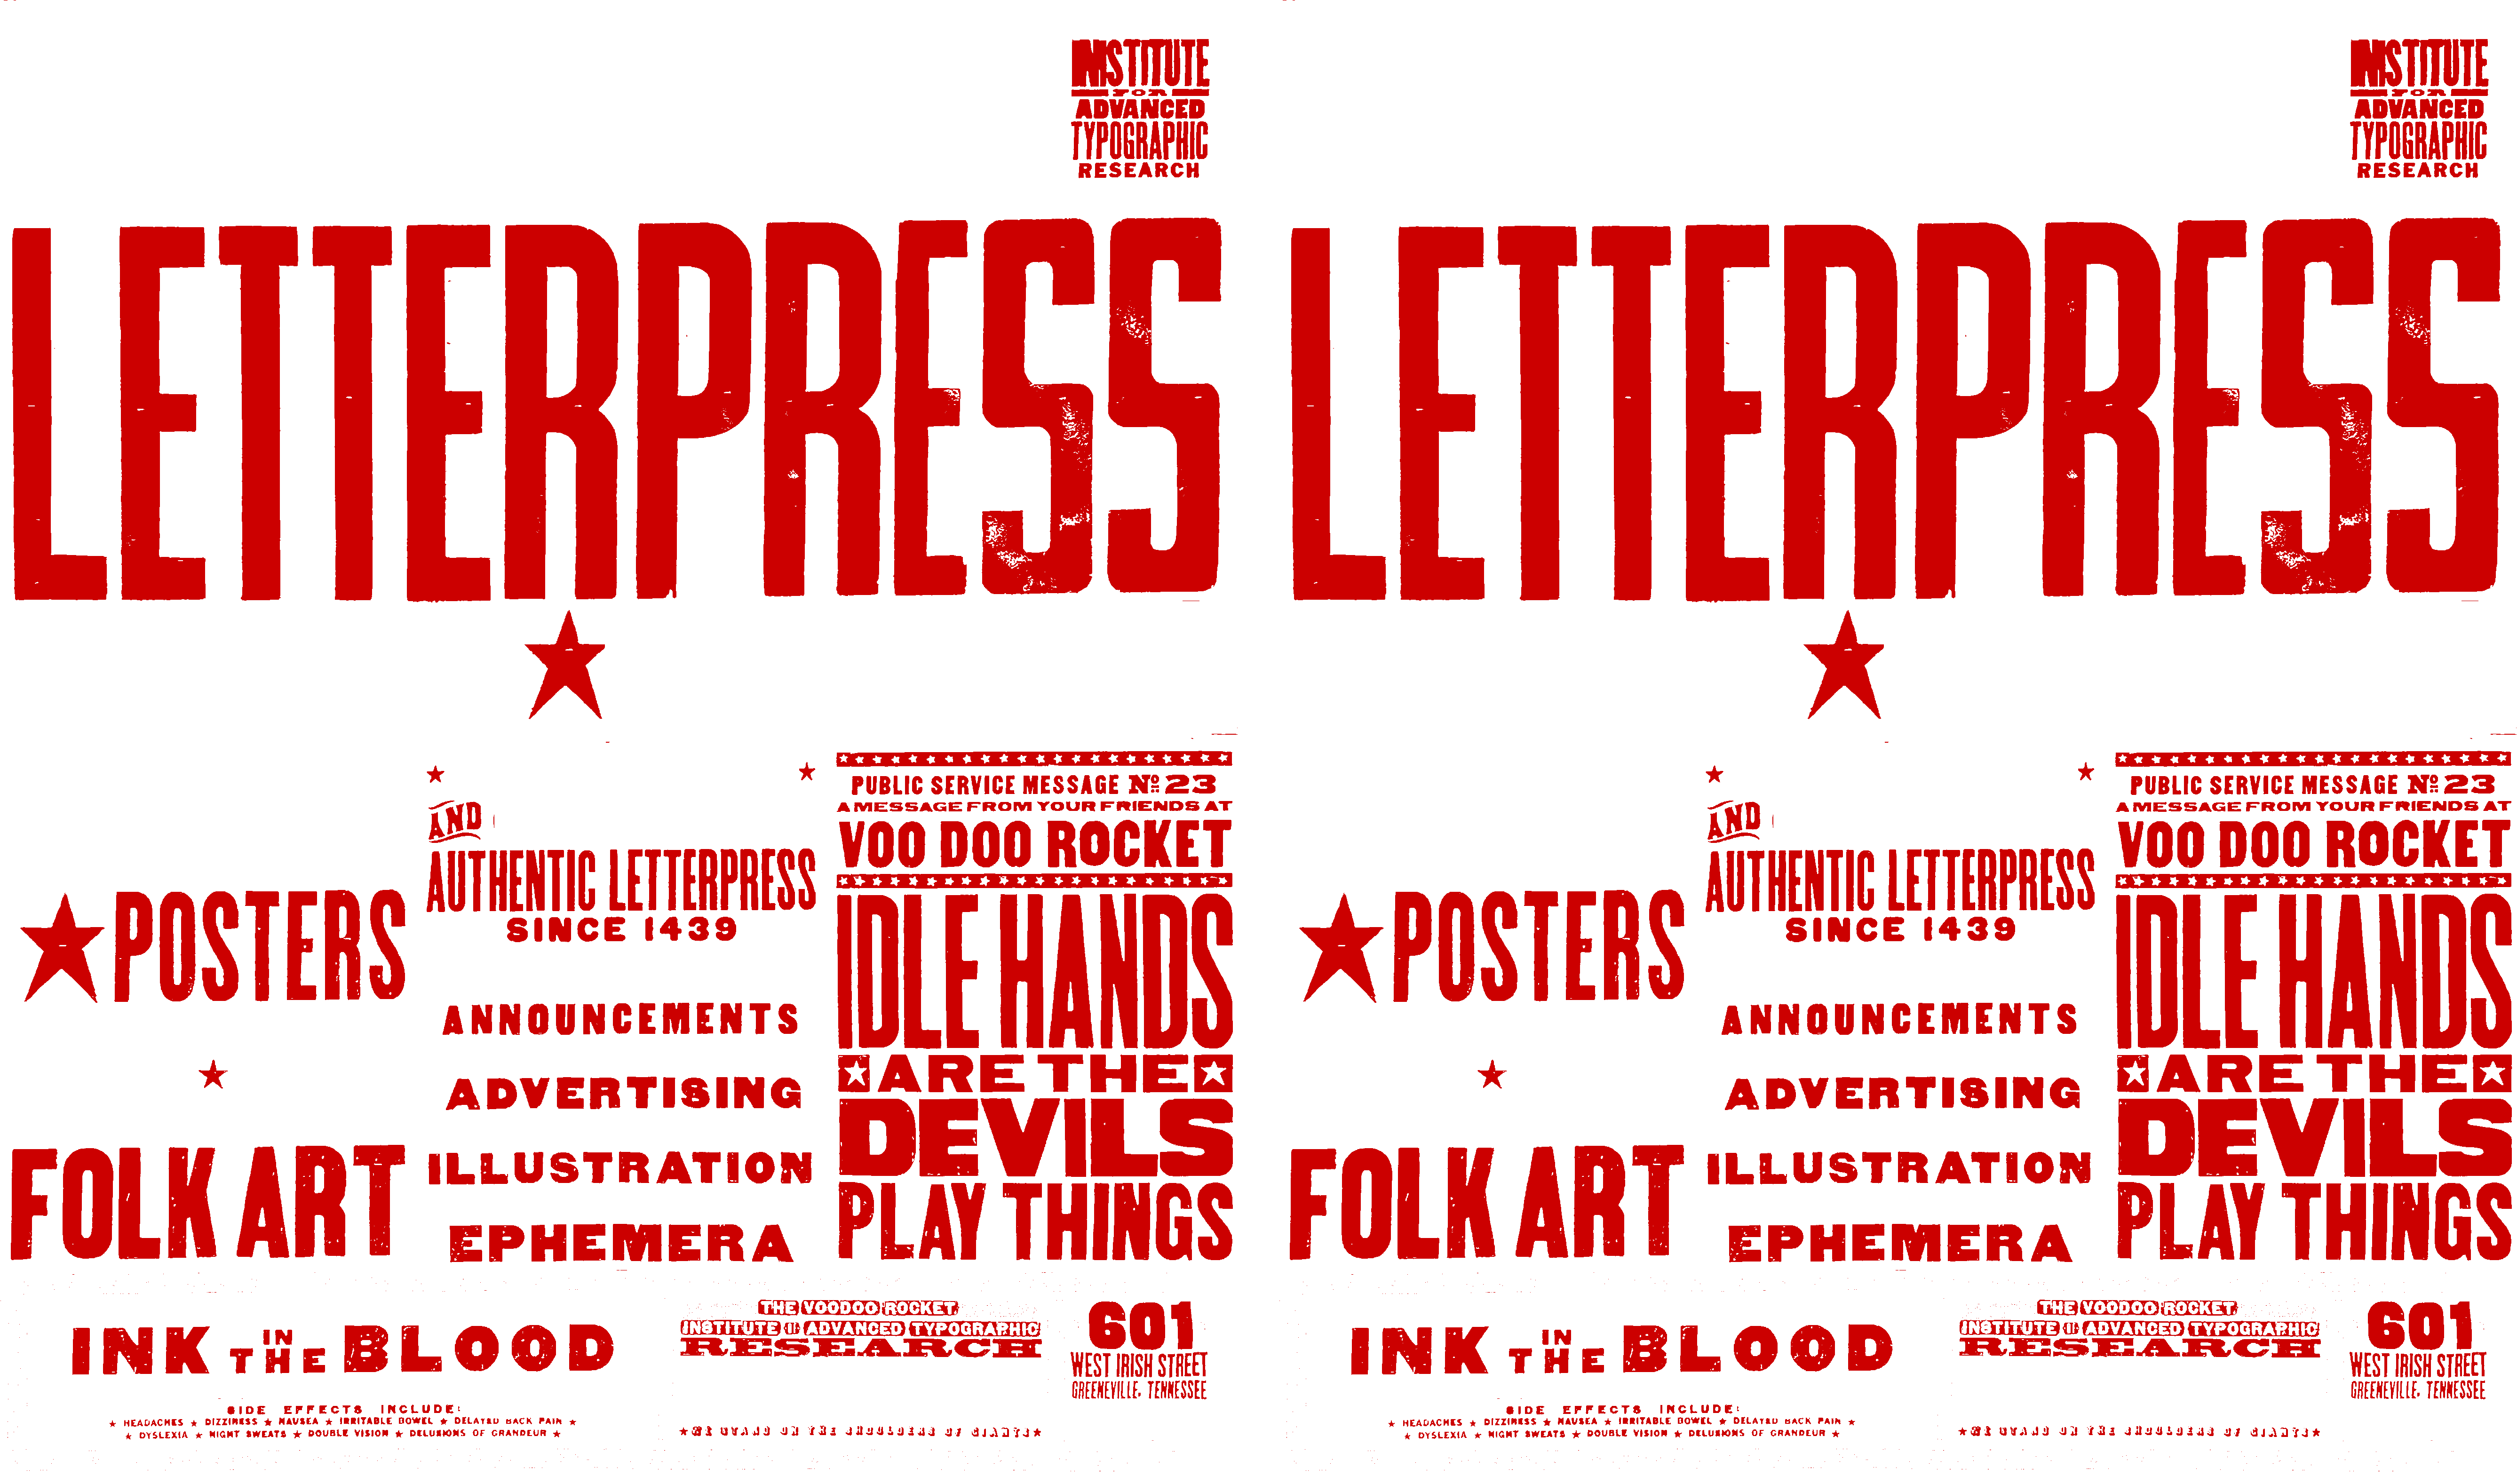 Show Prints, Posters, Fine Art, Folk Art, Original and Genuine Authentic Letterpress, since 1439, full custom, announcements, invitations, advertising, graphic design, illustration, fine art editions, ephemera. Public service message number 23, a message from your friends at Voo Doo Rocket, Idle Hands are the devils play things. 601 West Irish Street, Greenville, Tennessee